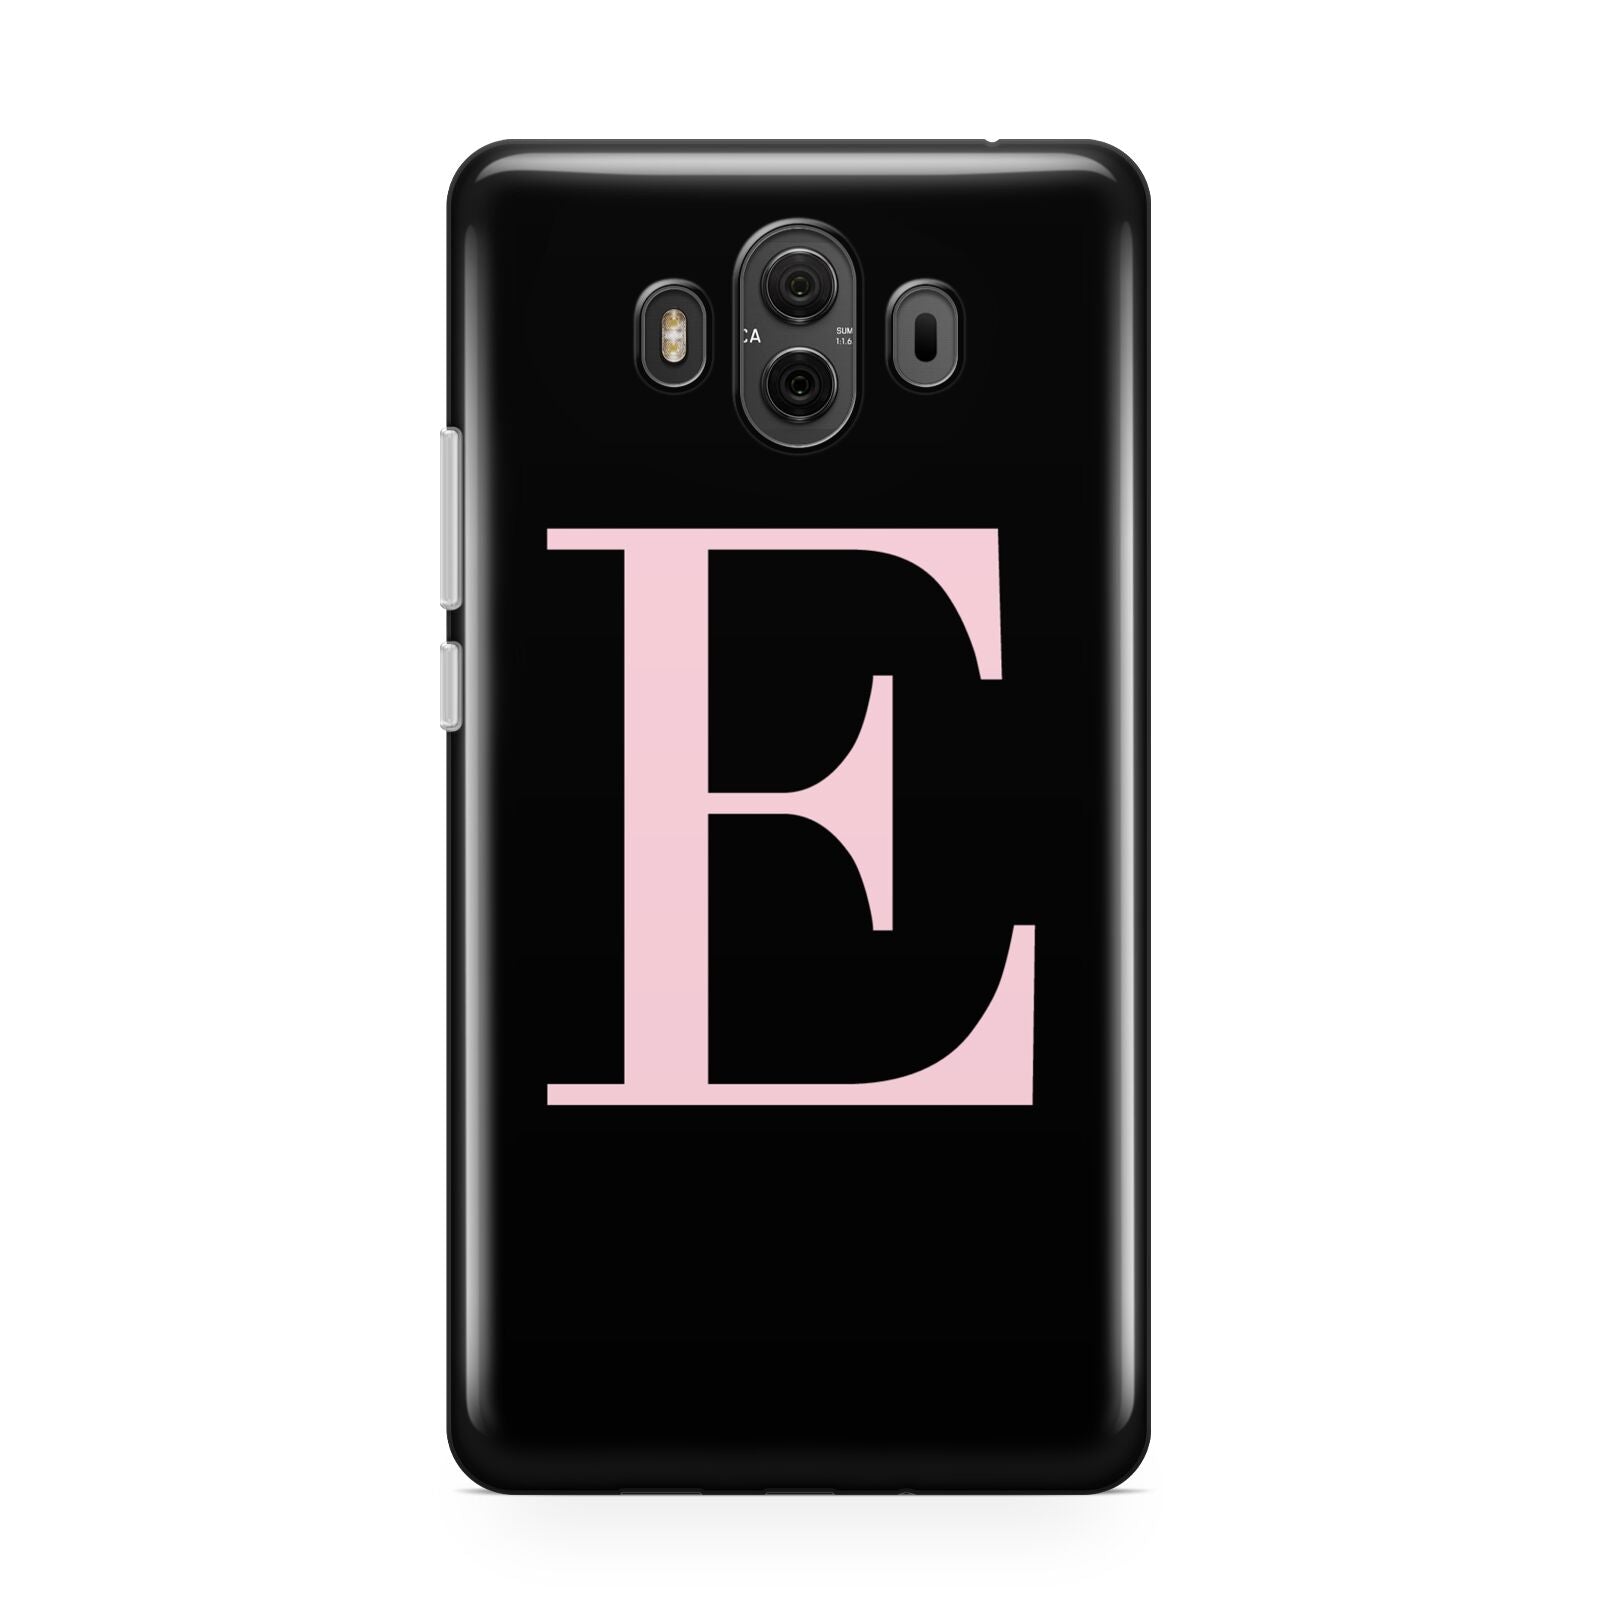 Black with Pink Personalised Monogram Huawei Mate 10 Protective Phone Case